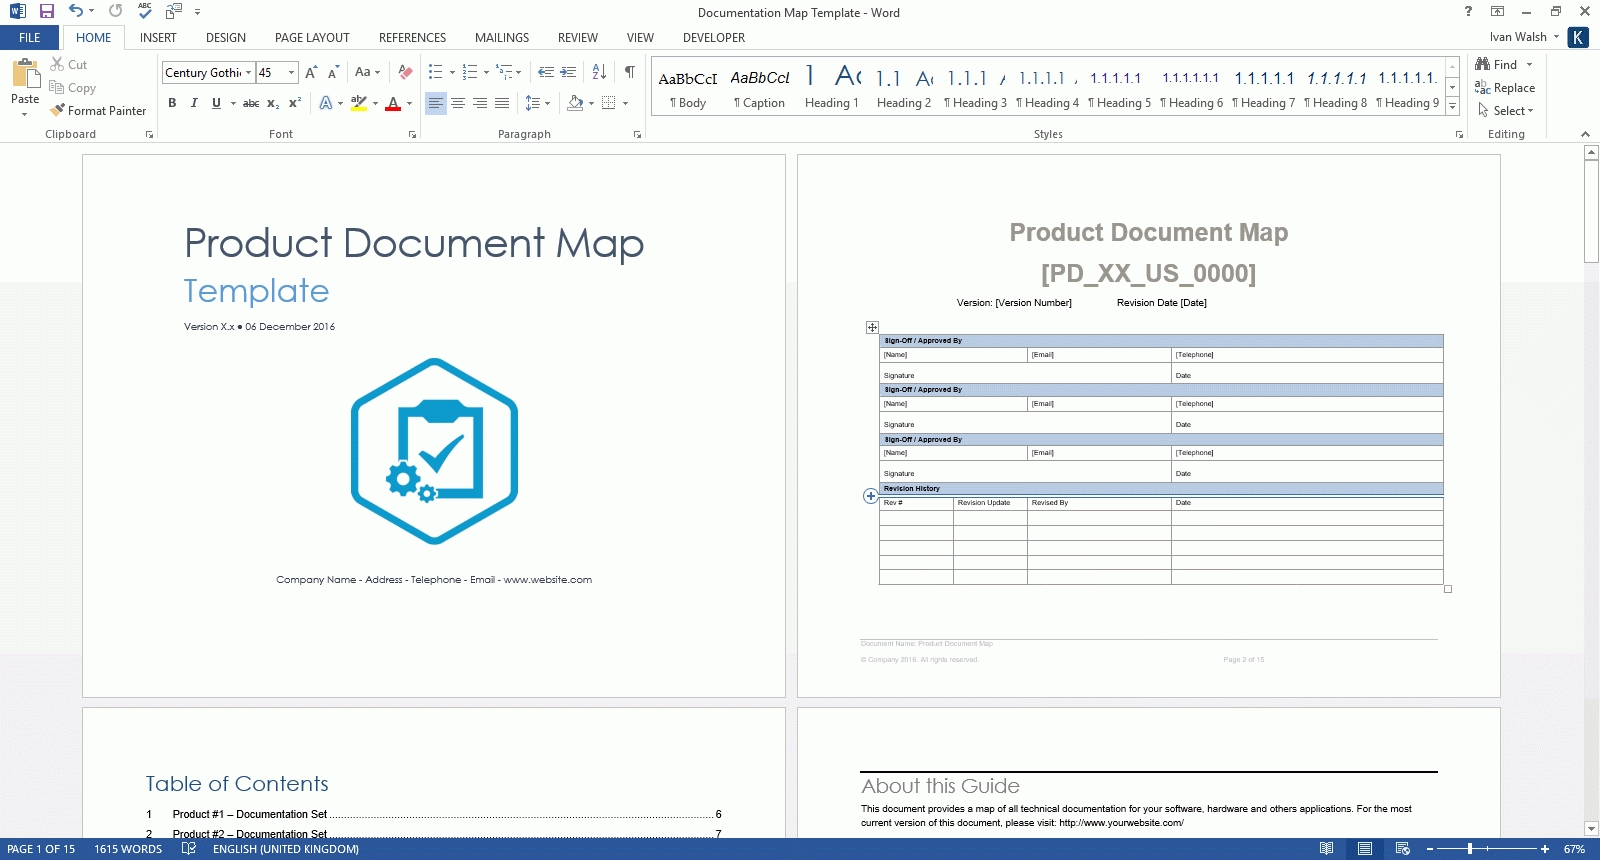 Product Document Map Template (Ms Word) – Templates, Forms, Checklists Intended For Information Mapping Word Template